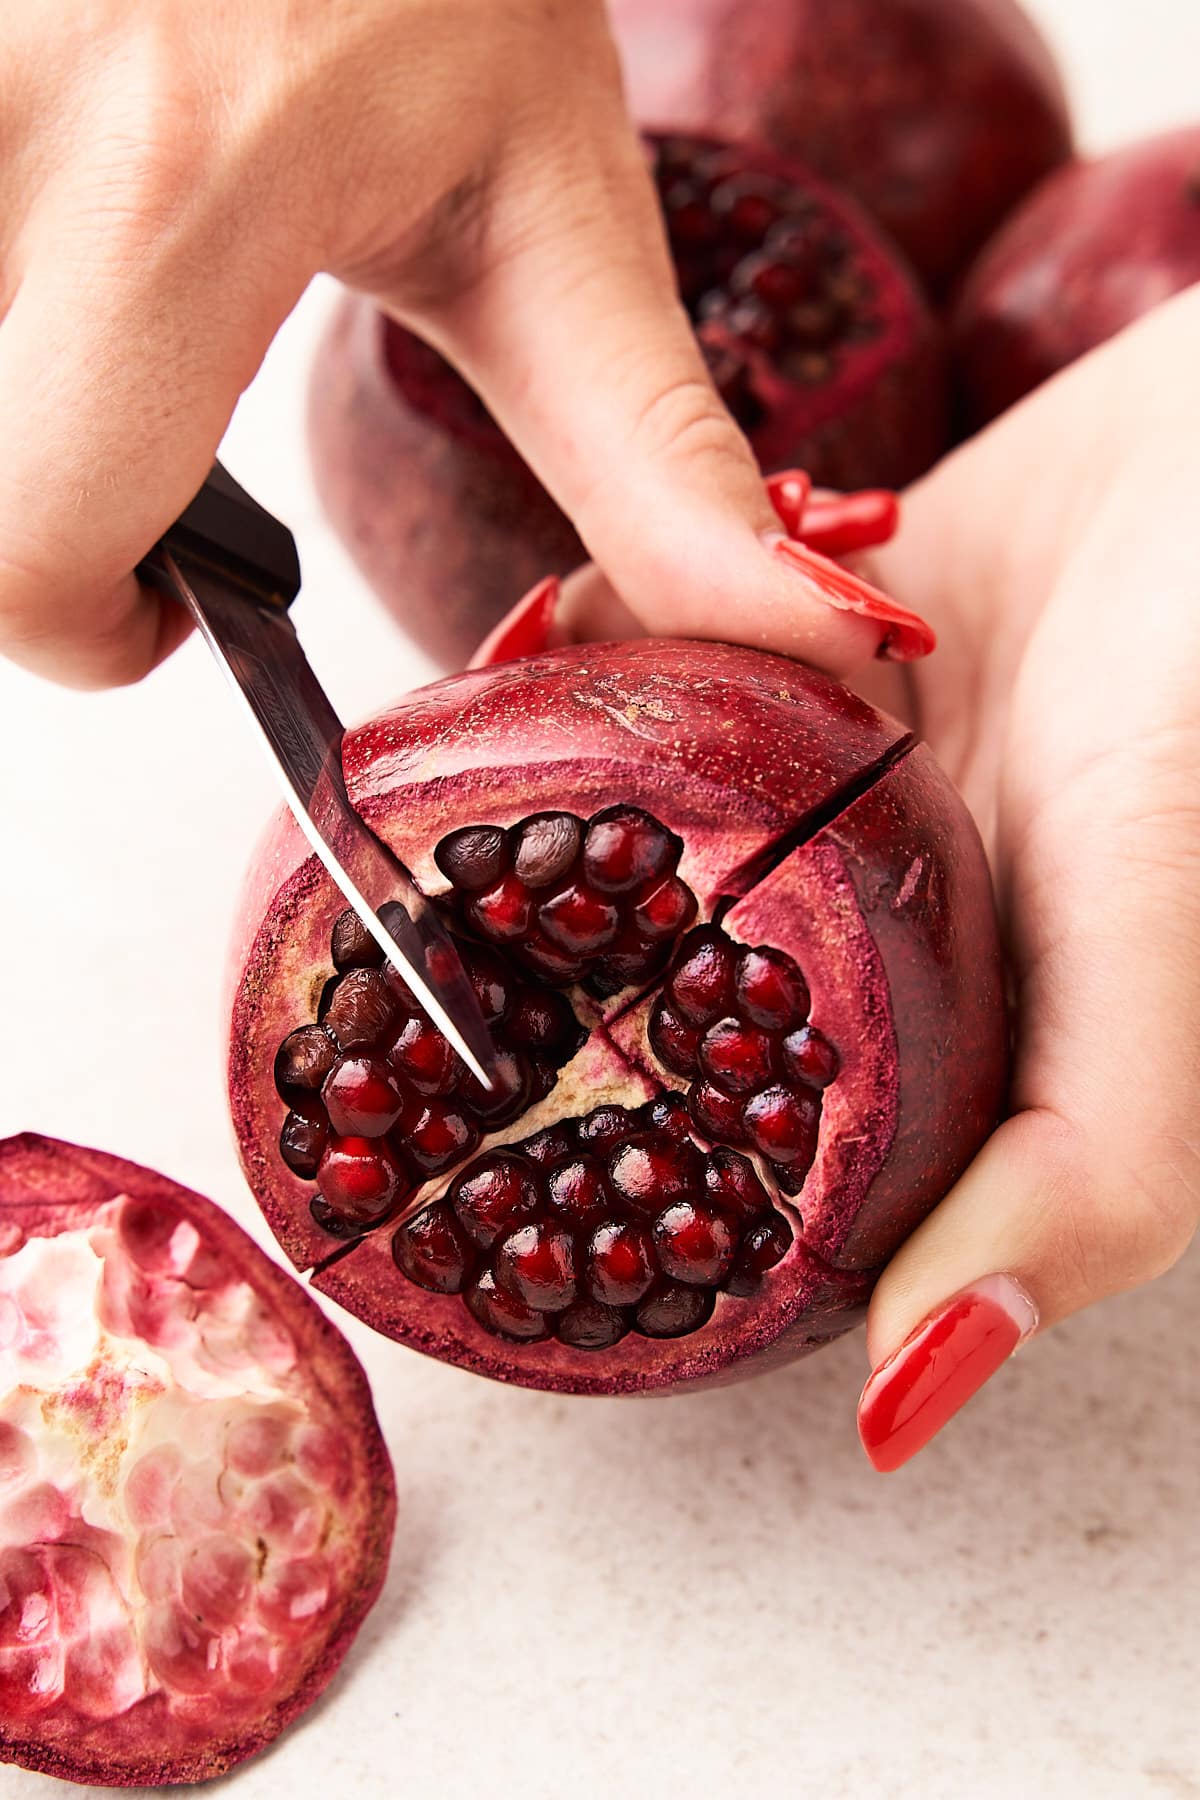 Cutting a pomegranate into sections.